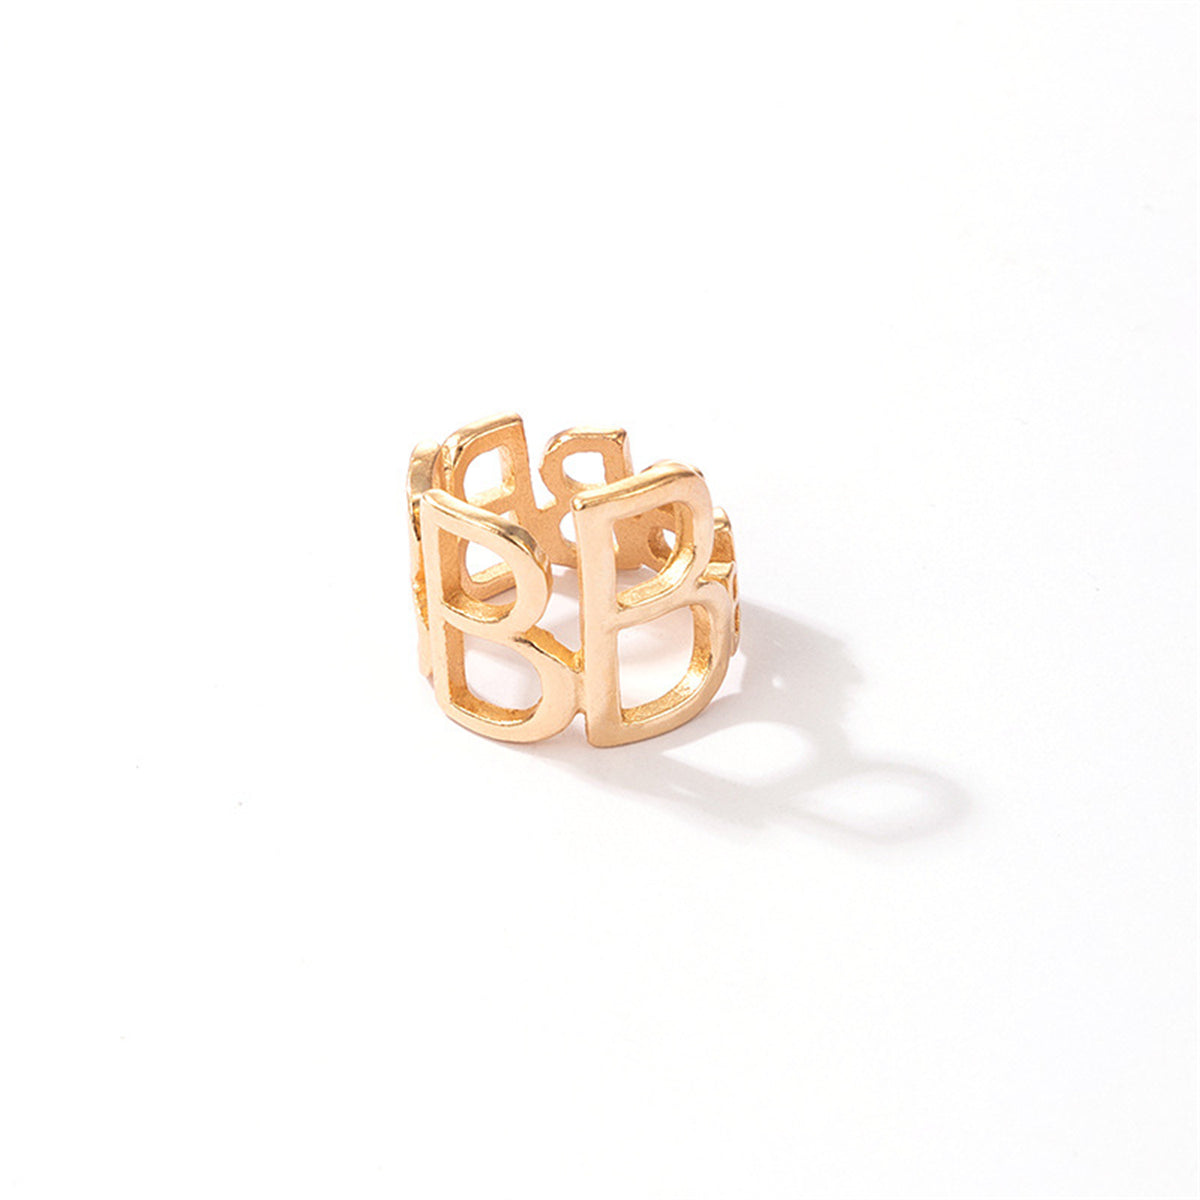 18K Gold-Plated 'B' Openwork Adjustable Ring